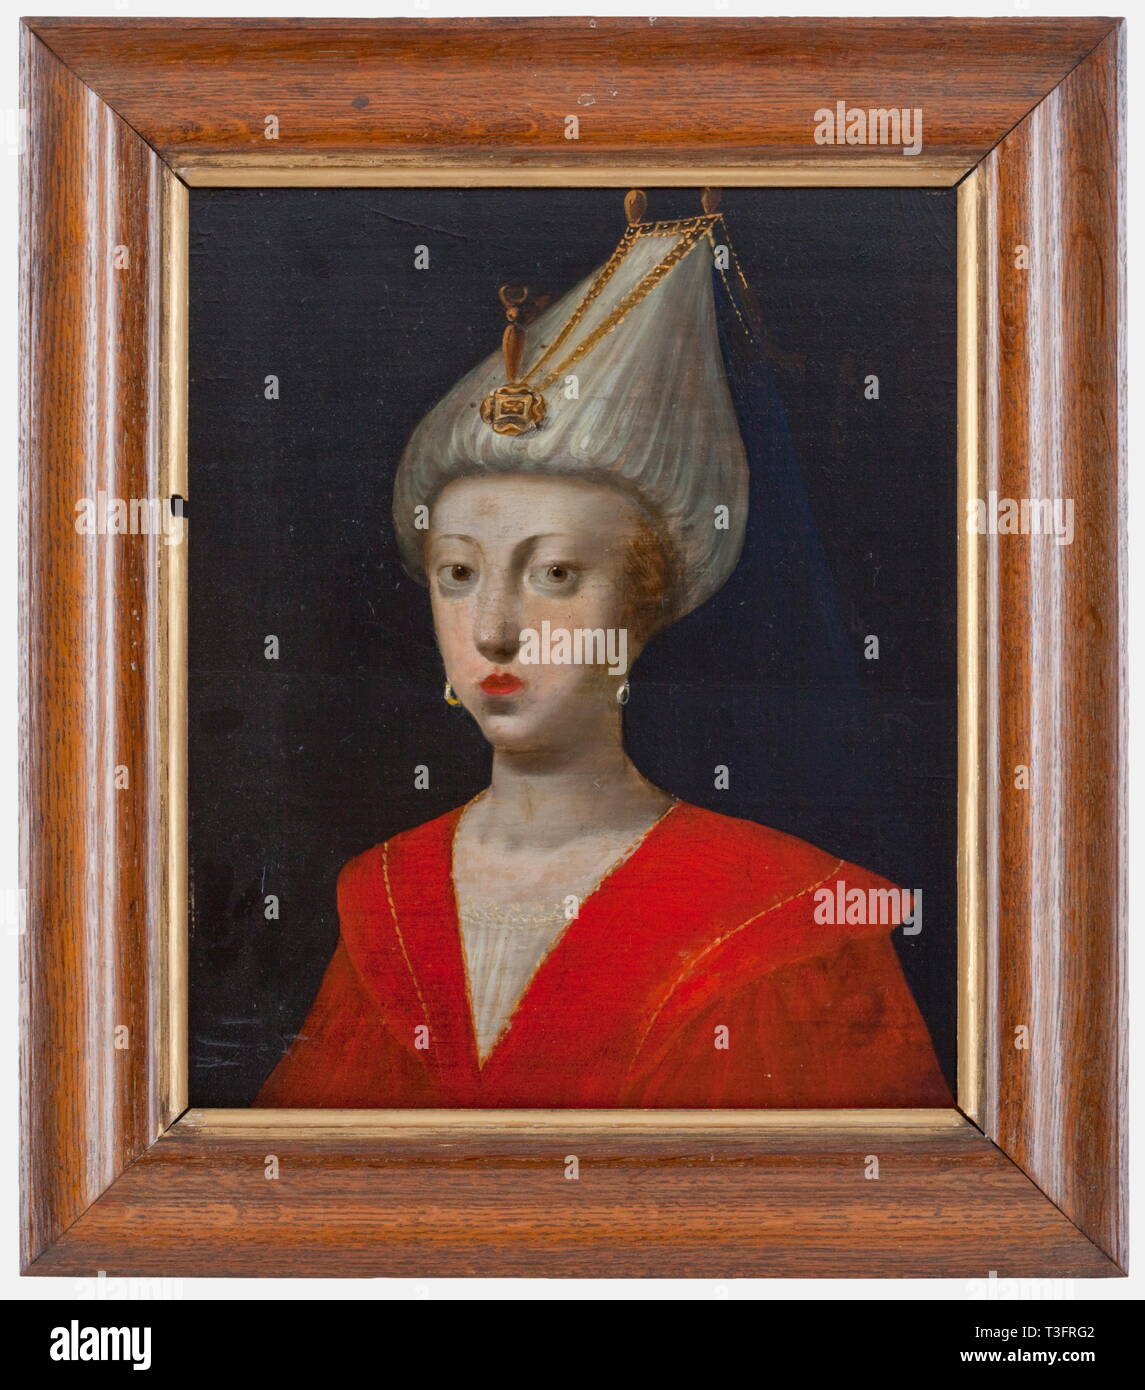 A portrait of Roxelane, Germany or France, 18th century Oil on oak wood. Bust portrait of a young, strawberry blonde woman with Turkish harem dress and gold jewellery. Panel of the painting broken in the middle, restored. Later oak wood frame. Dimensions of the painting 31 x 26 cm, framed dimensions 40 x 35 cm. Roxelane was a young, Polish girl that was kidnapped by the Crimean Tartars and sold to Istanbul as a slave for the harem of the old seraglio. As the first slave concubine ever she was released to freedom by the sultan and became the power, Additional-Rights-Clearance-Info-Not-Available Stock Photo